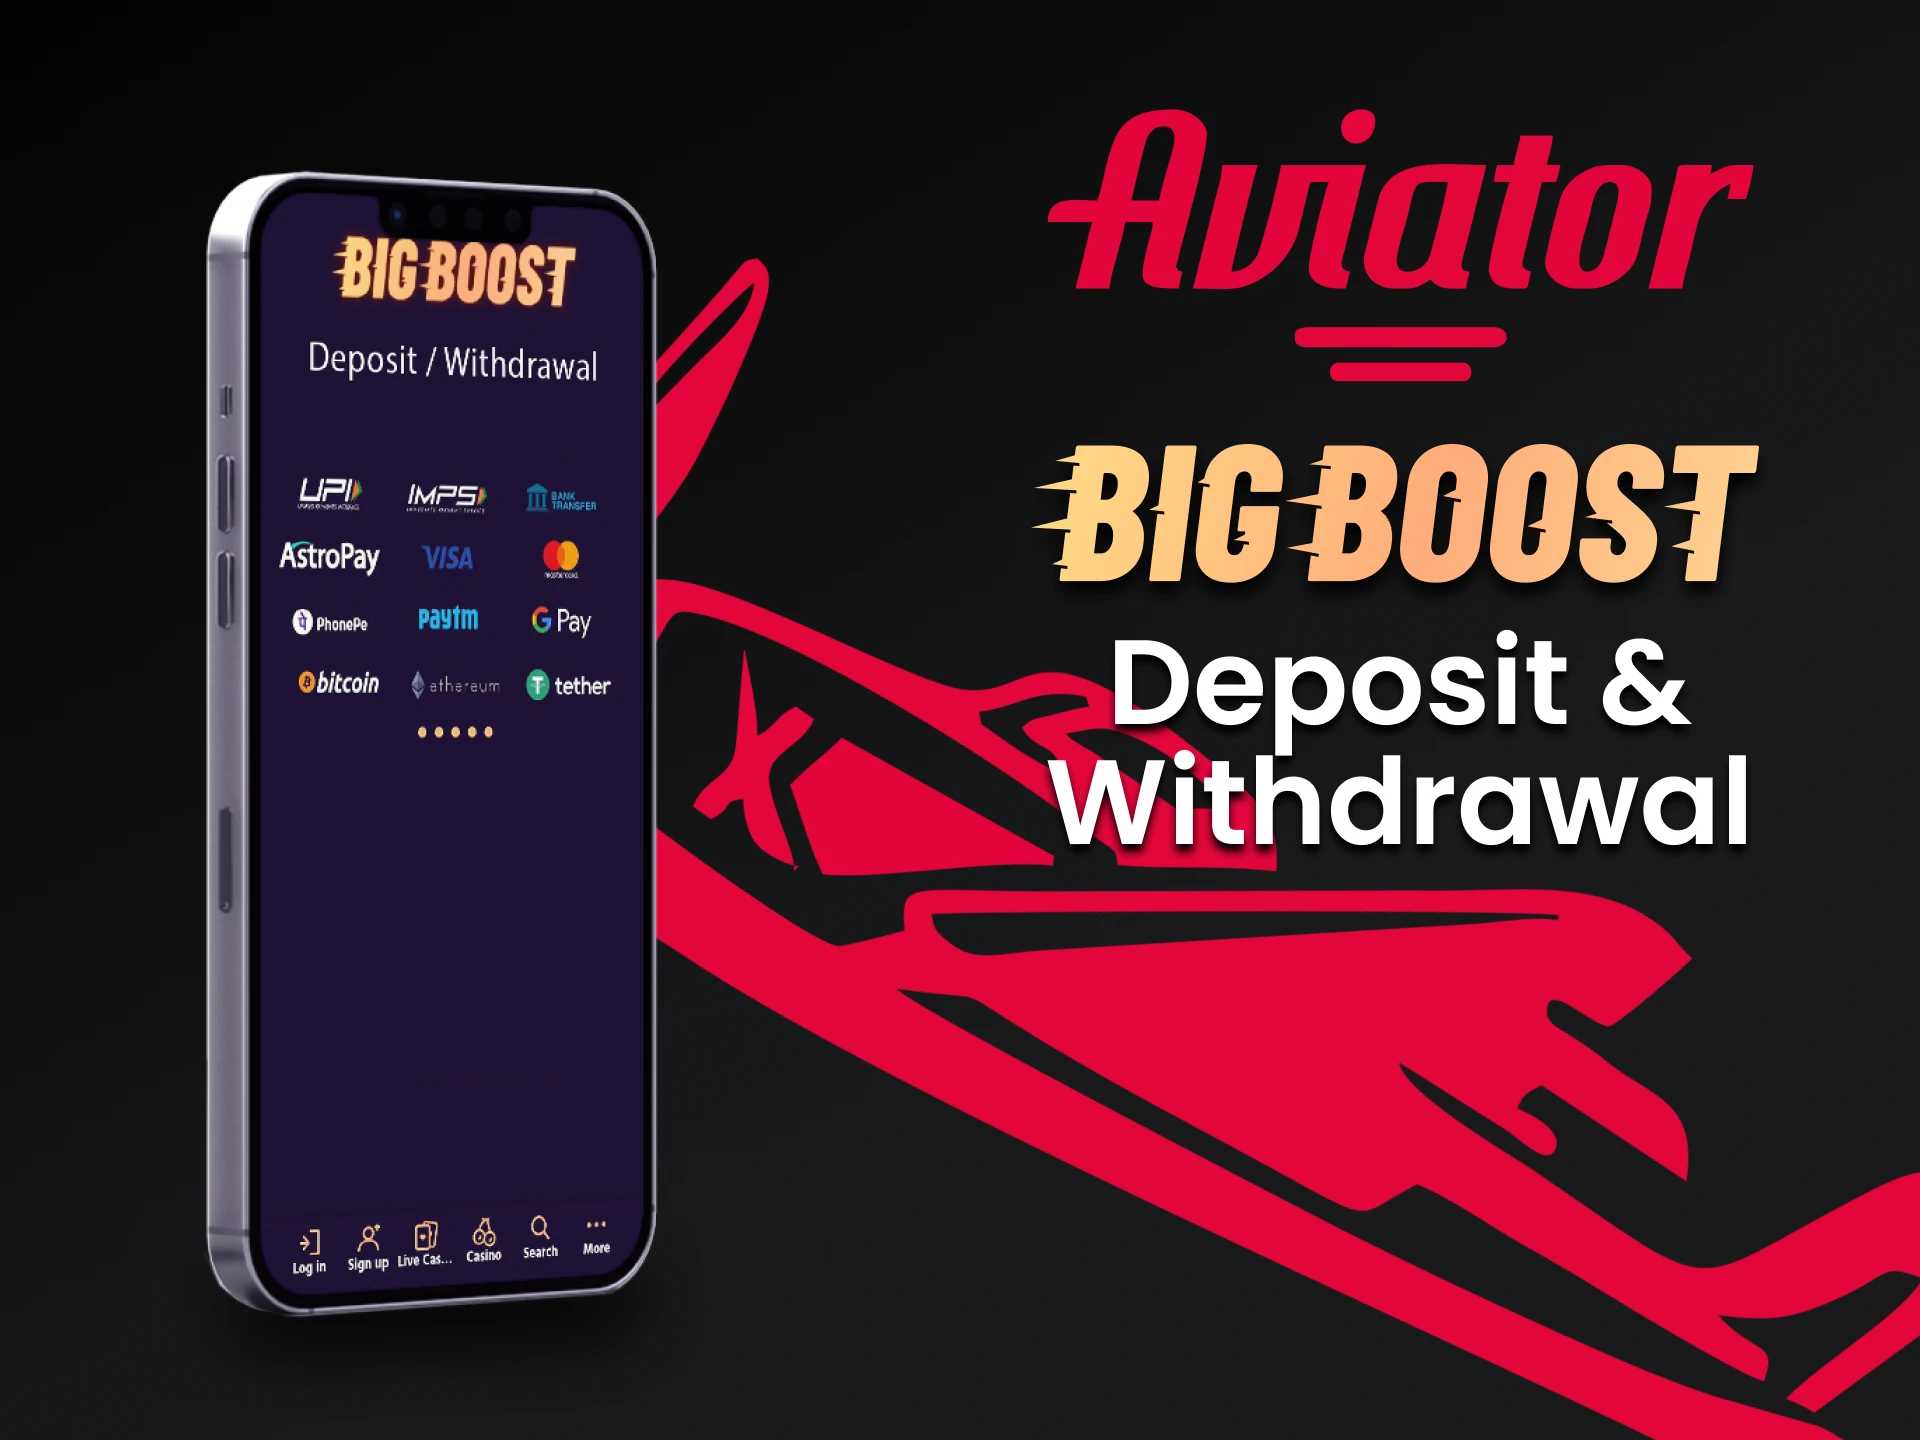 We will tell you about the transaction methods for the Aviator game in the Big Boost app.